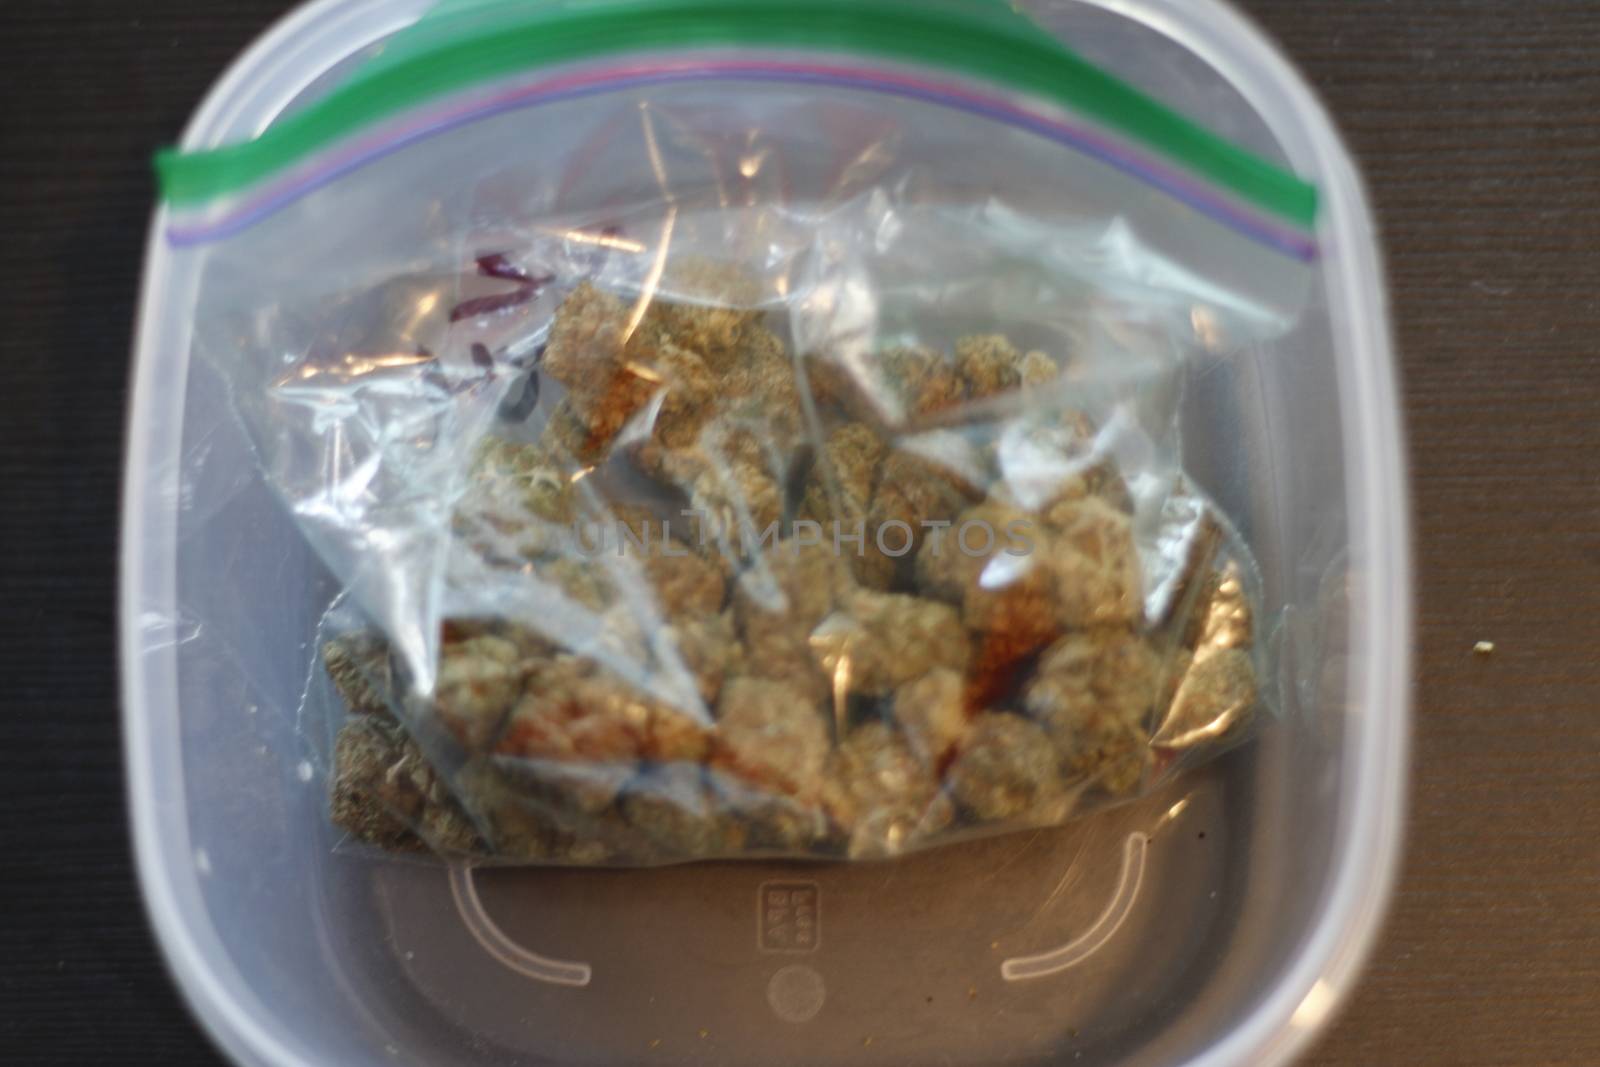 Looking down at a zipper bag full of marijuana on its side spilling buds out the open top isolated with a white background.